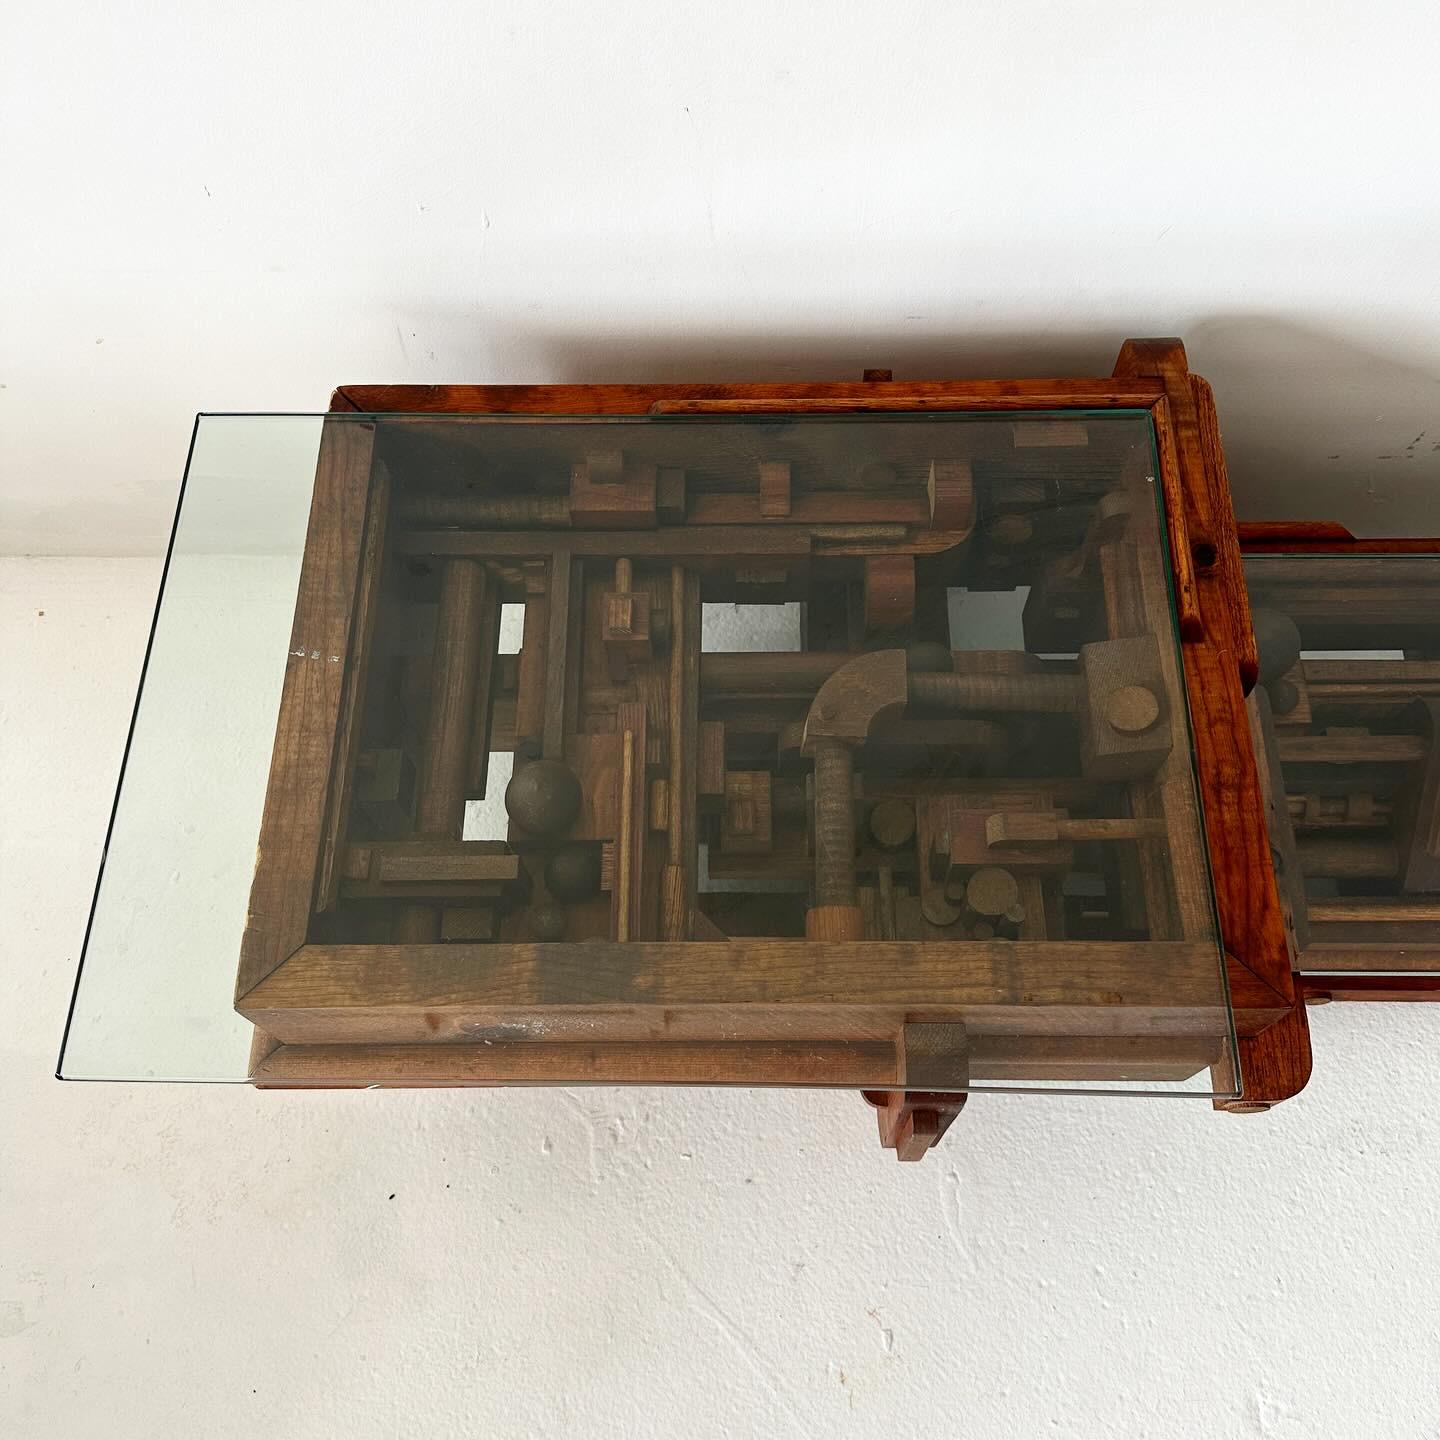 vintage handmade, bi-level low coffee table. Solid wood with glass tops -- resemembles Louise Nevelson with found wood pieces collaged into an assembly that's part steampunk part organic.